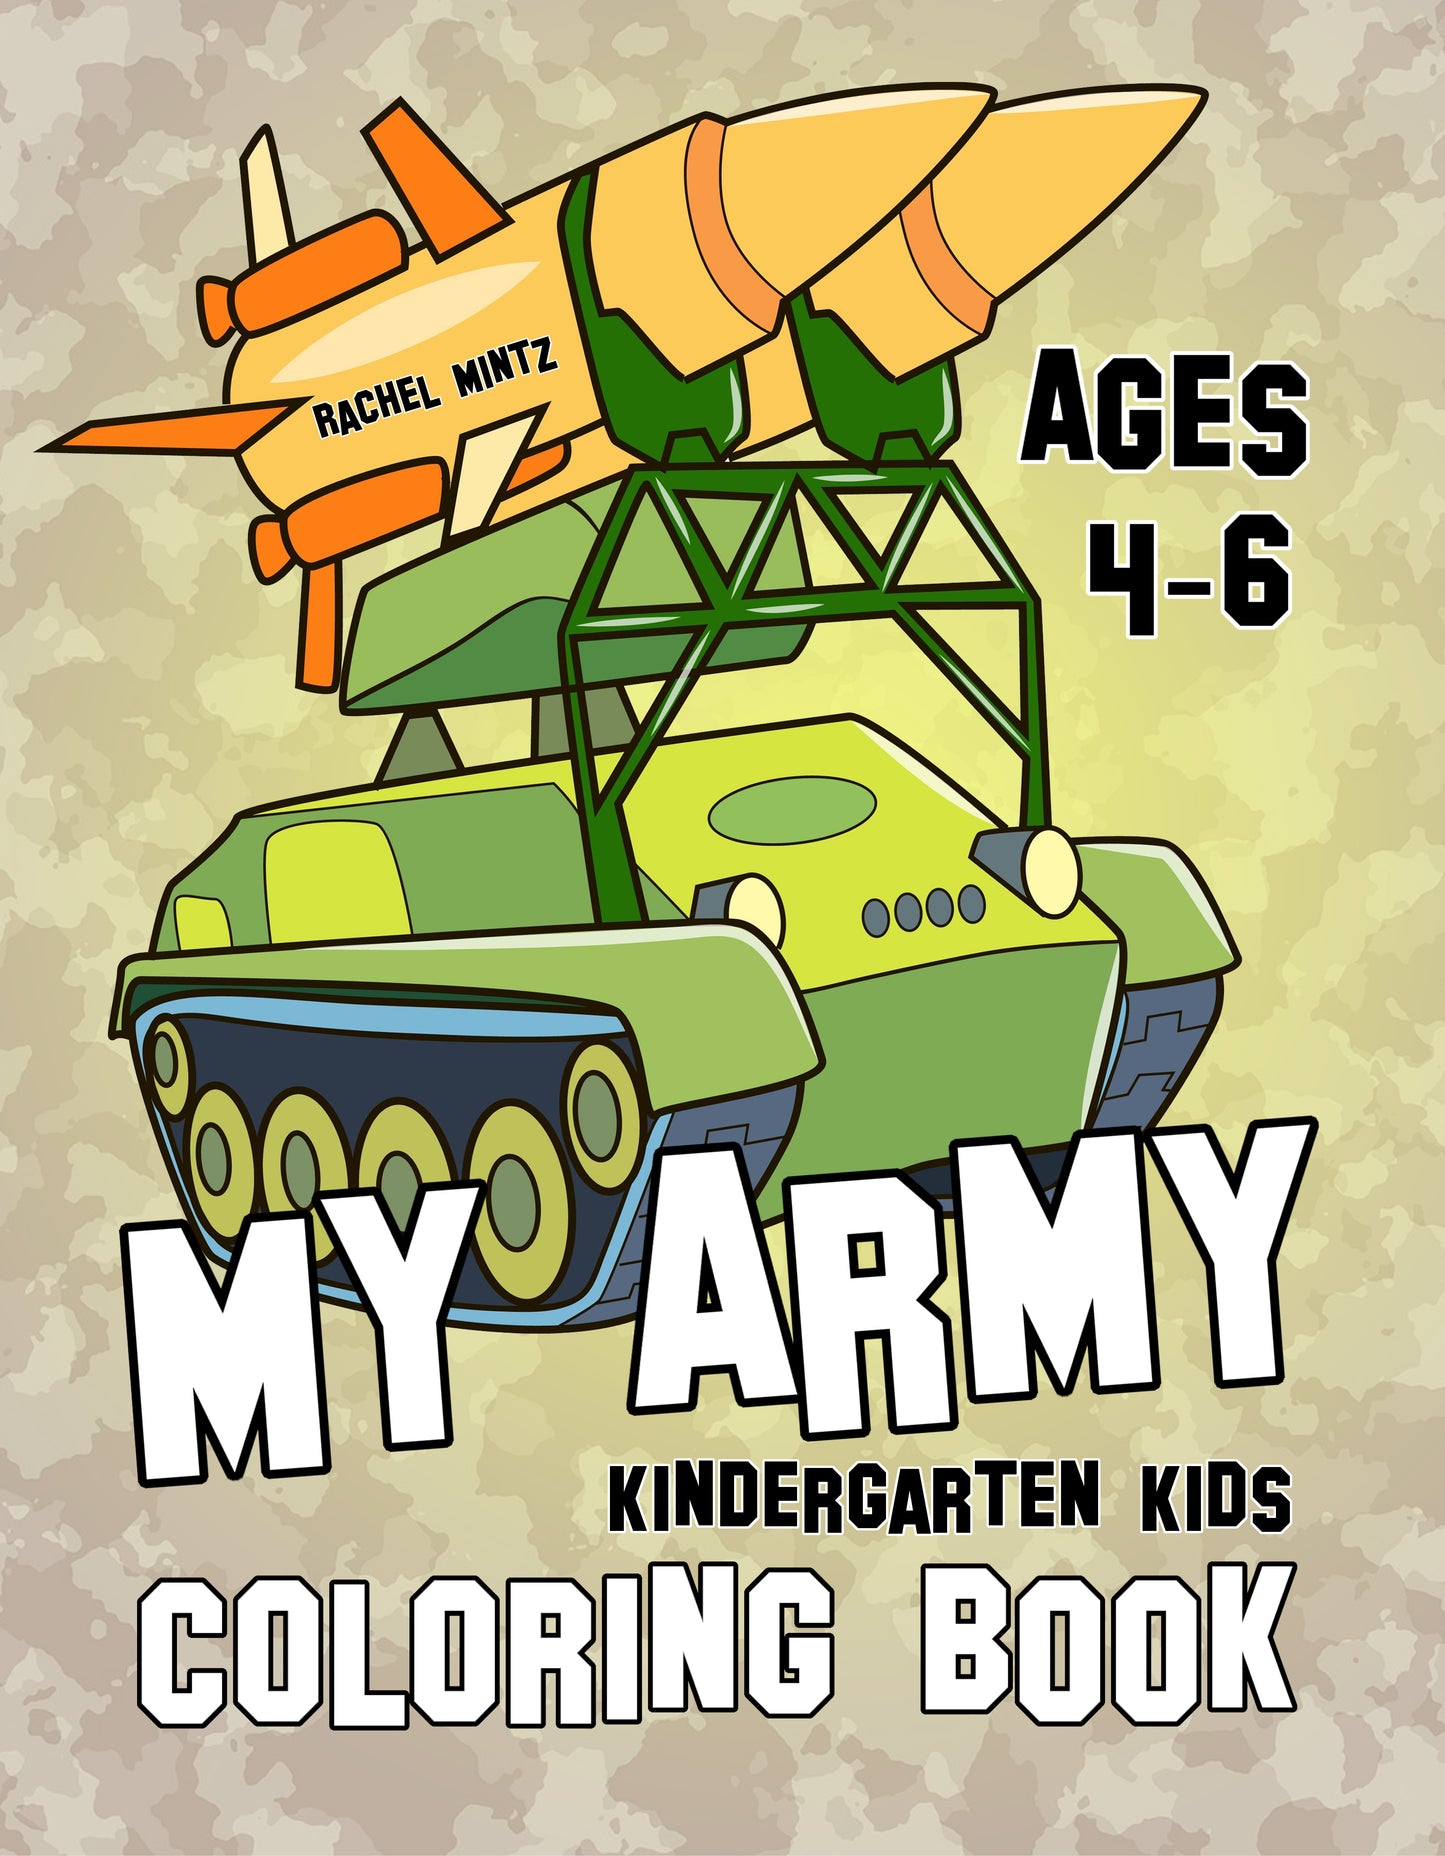 My Army Military coloring book for kids - Rachel Mintz